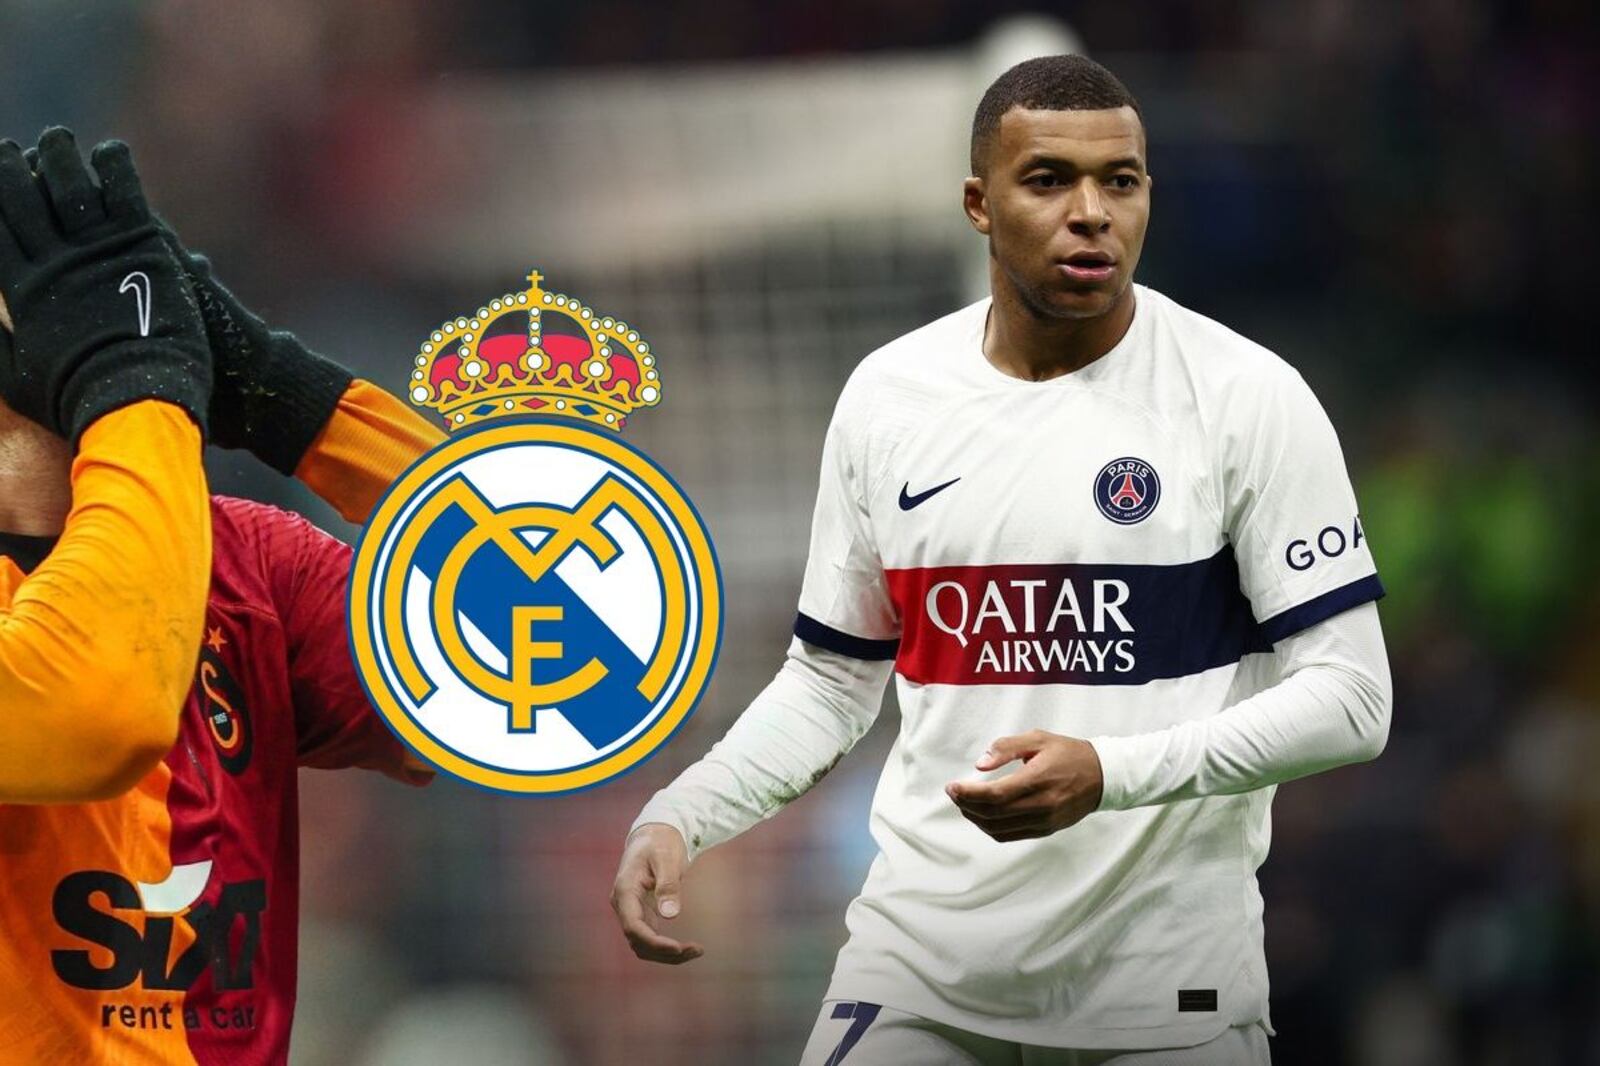 After rejecting Icardi, Real Madrid's final decision to sign Mbappé in January